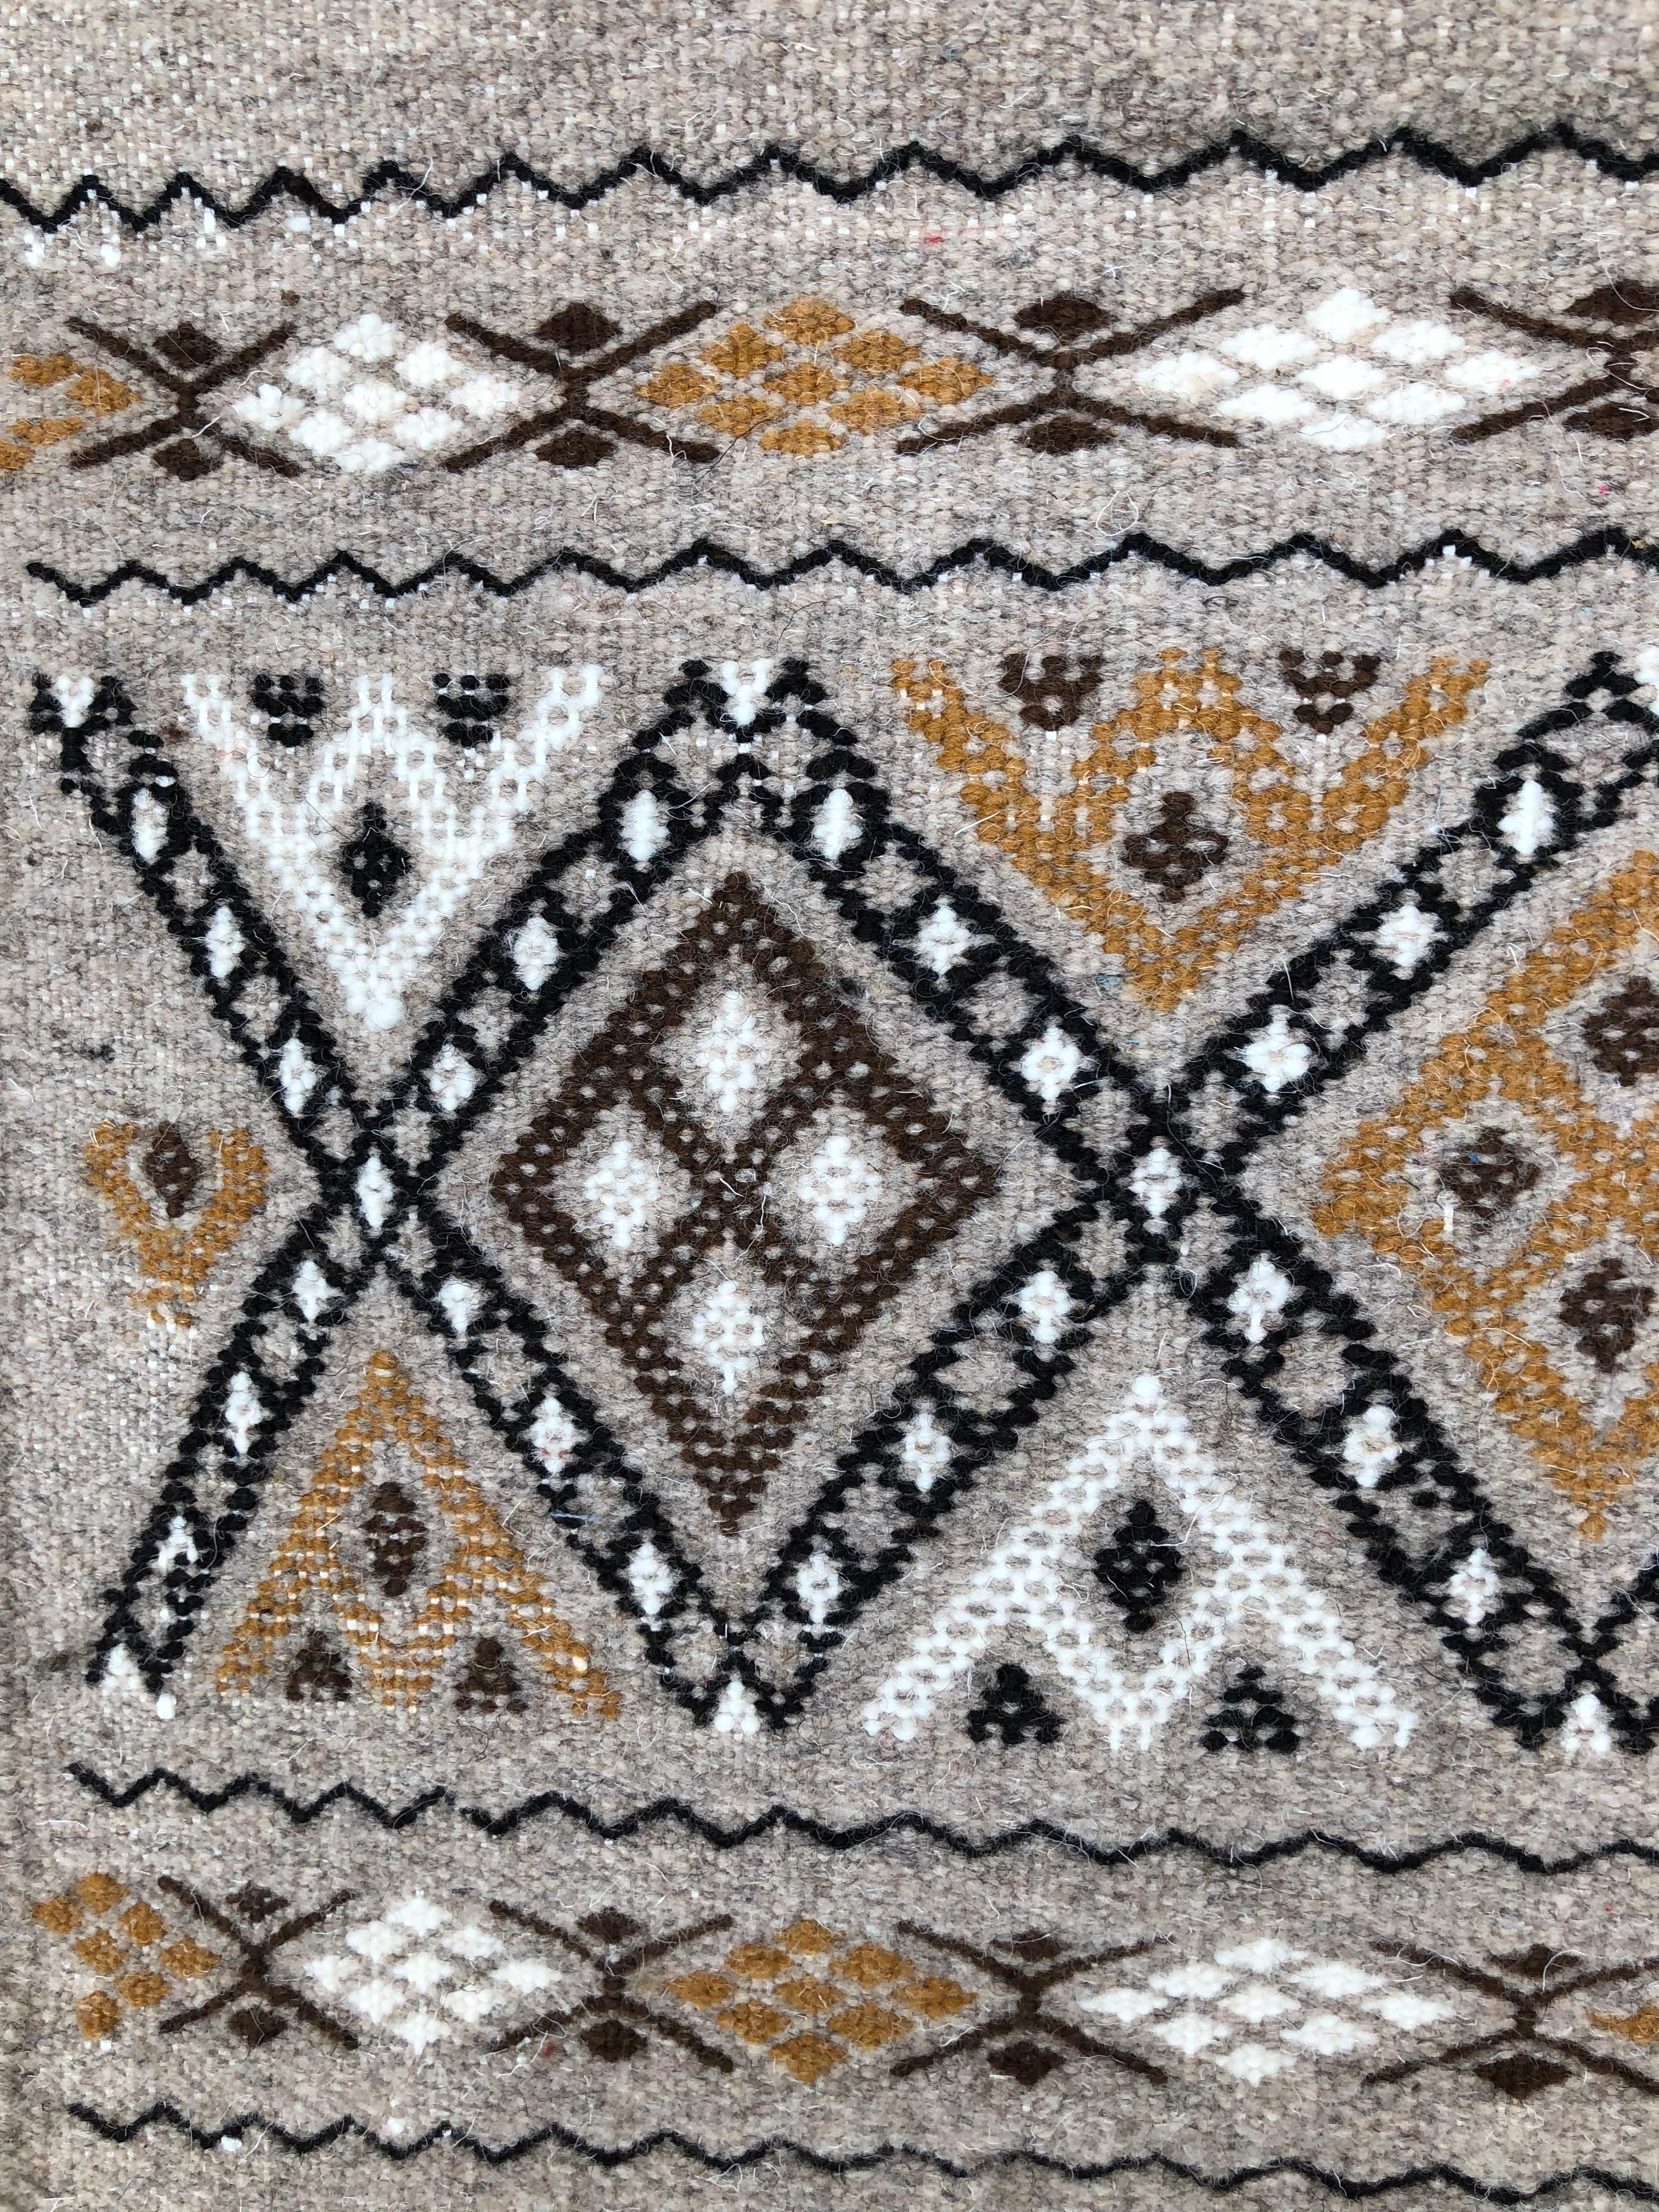 This Berber rug is hand-loomed from 100% sheep's wool and pearl cotton fibers. Berber use them in multi purposes on floor, hang them on wall as art or put on sofa.

The quality is exceptional -- a super tight weave with expertly executed